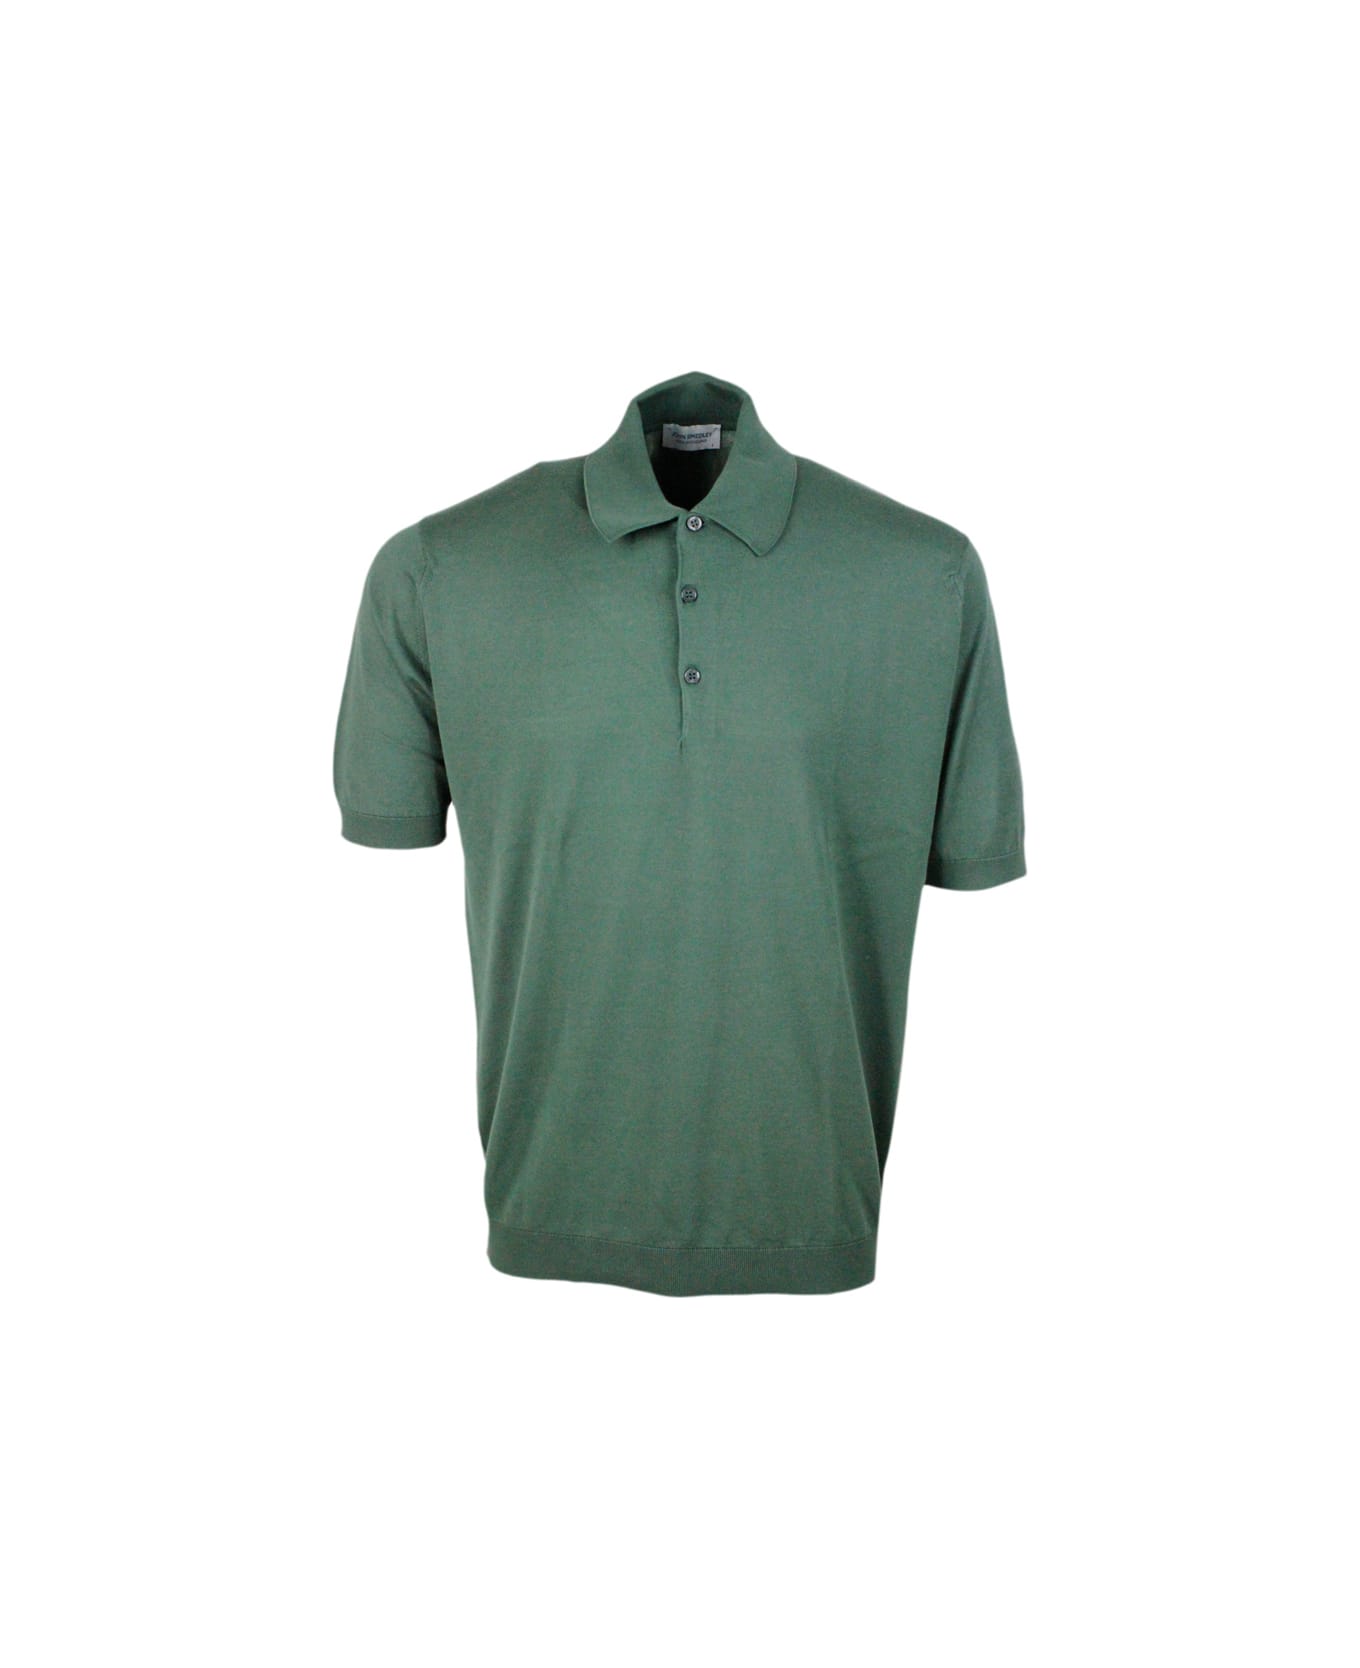 John Smedley Short-sleeved Polo Shirt In Extra-fine Cotton Thread With Three Buttons - Green